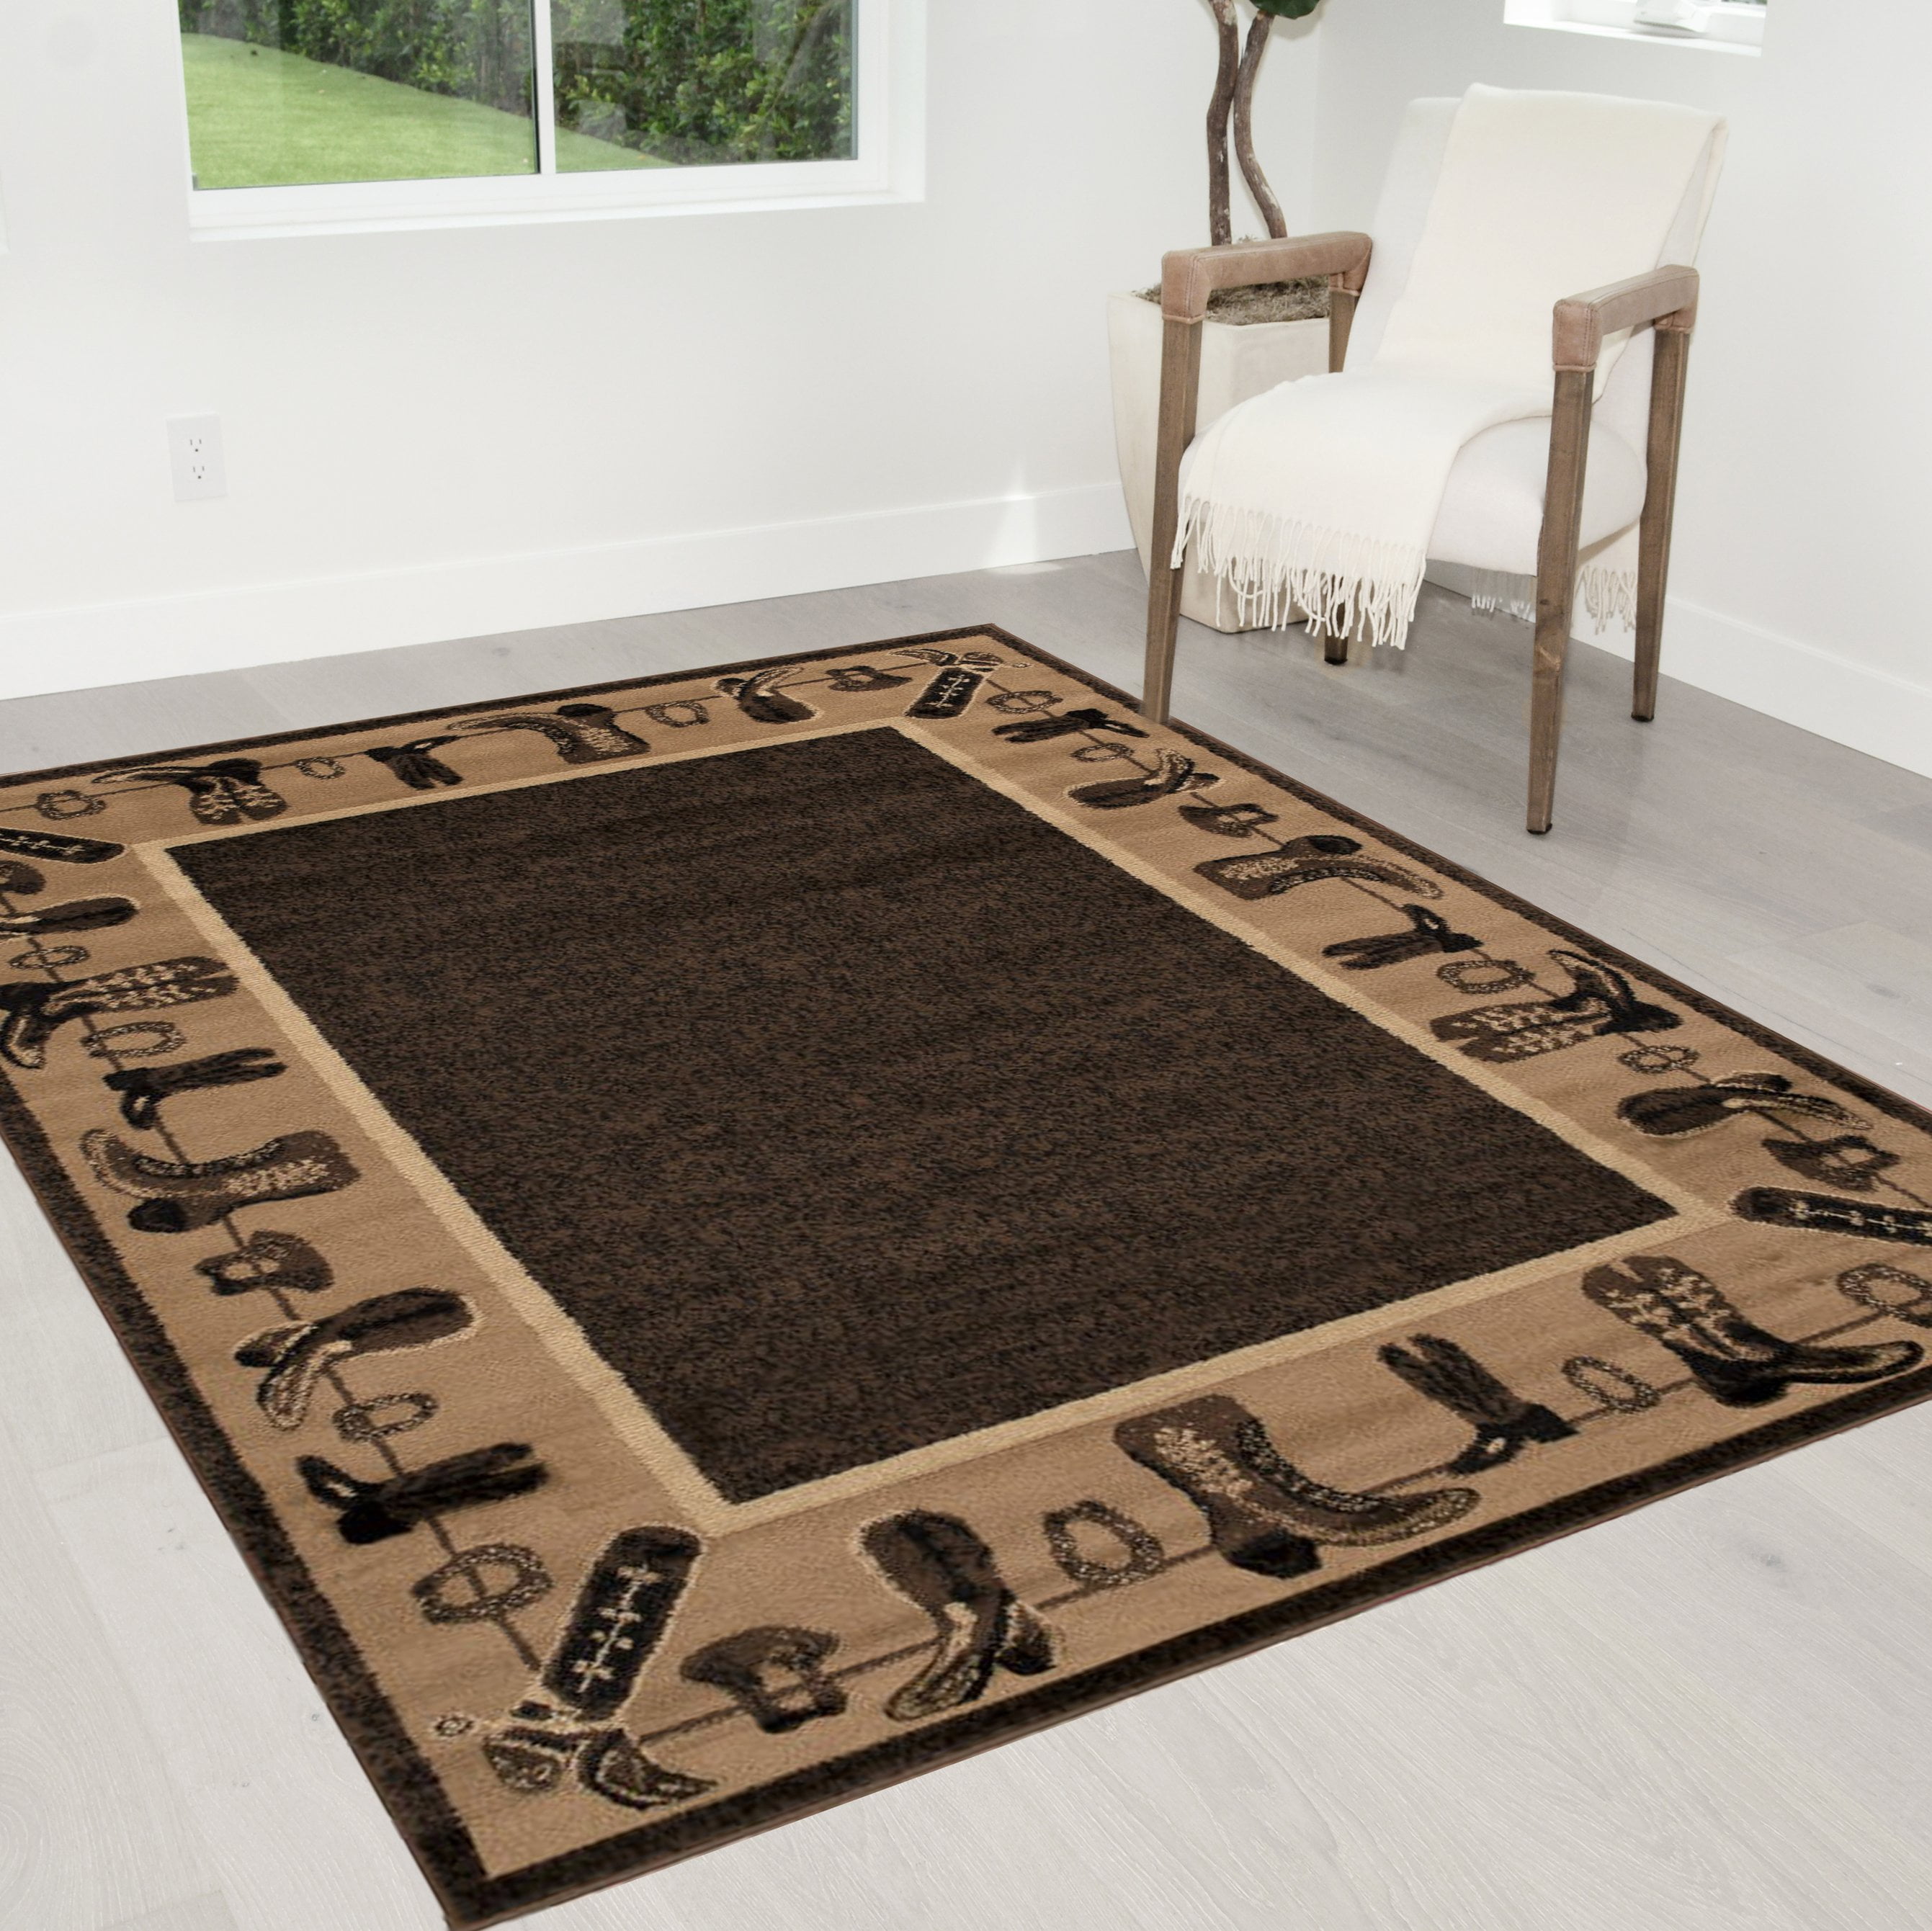 Rug For Lodge Cabin Nature and Animals Geometric Area Rugs Cabin Carpet Flooring 